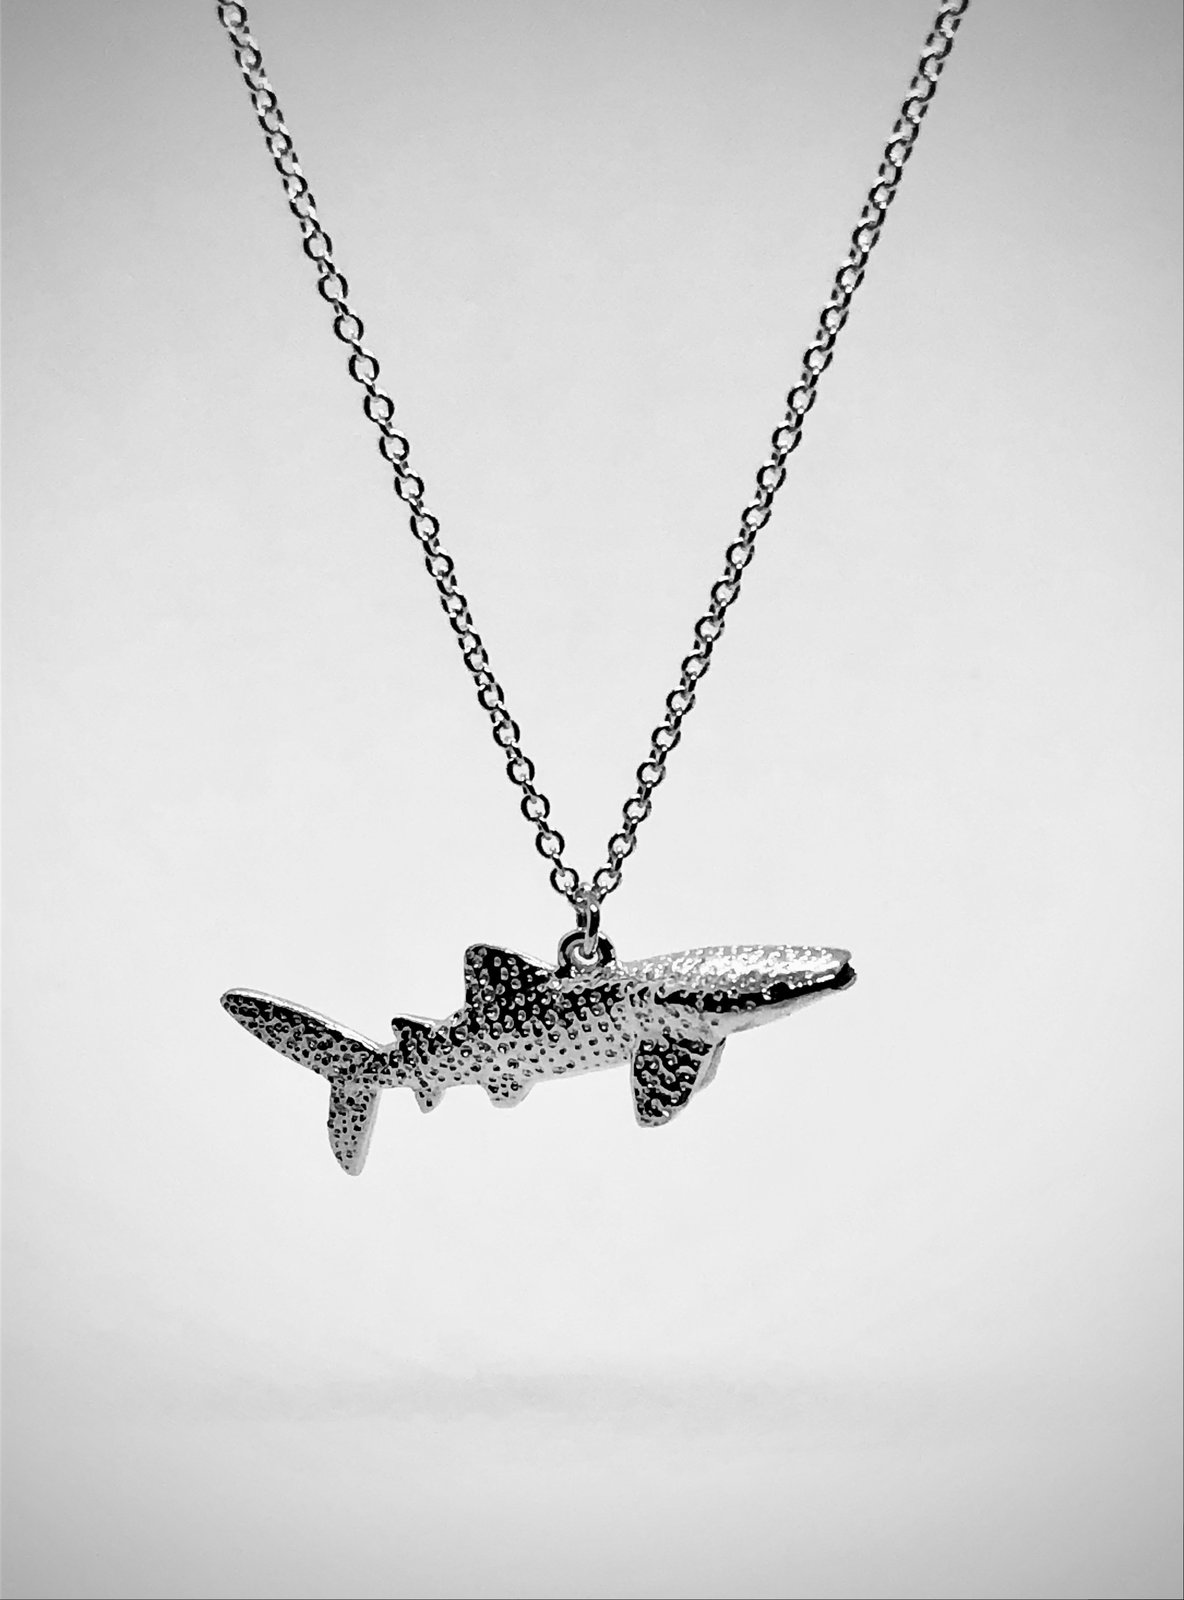 Whale Shark Necklace for Men and Women- Bronze Whale Shark Pendant for Men  and Women, Shark Jewelry, Gifts for Shark Lovers, Sea Life Jewelry -  Walmart.com